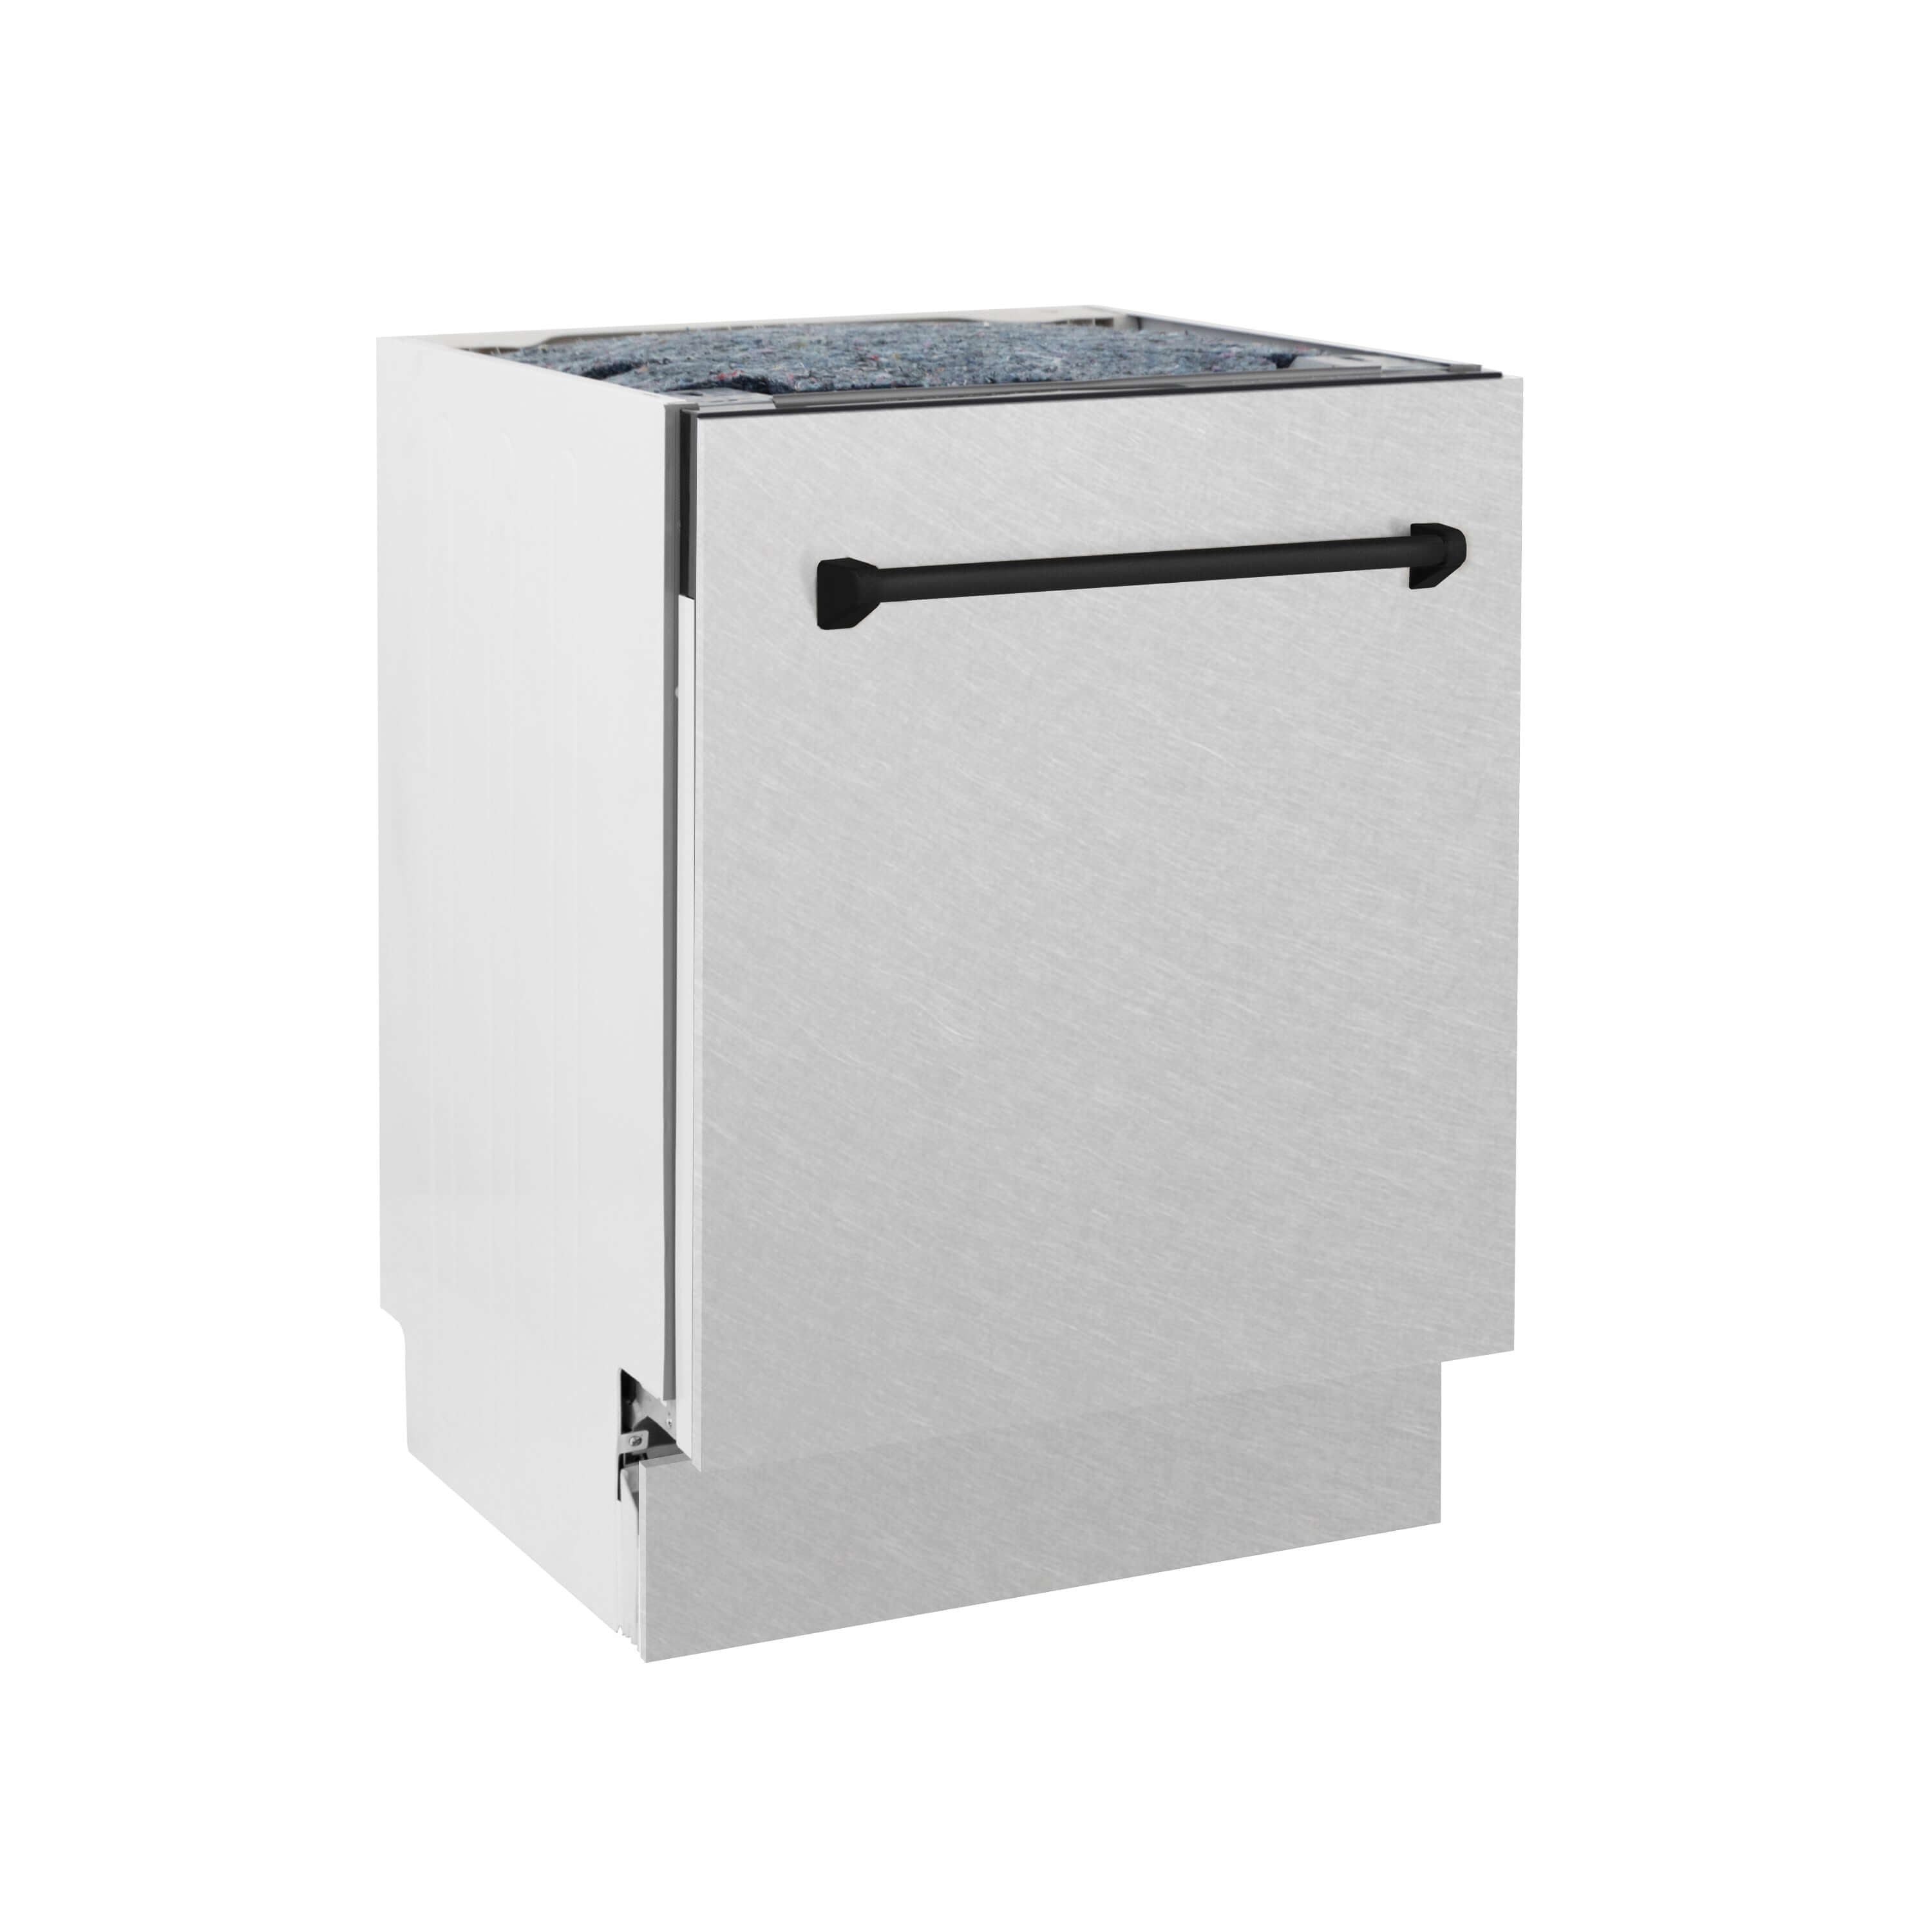 ZLINE Autograph Edition 24 in. Tallac Series 3rd Rack Top Control Built-In Tall Tub Dishwasher in Fingerprint Resistant Stainless Steel with Matte Black Handle, 51dBa (DWVZ-SN-24-MB) front, closed.